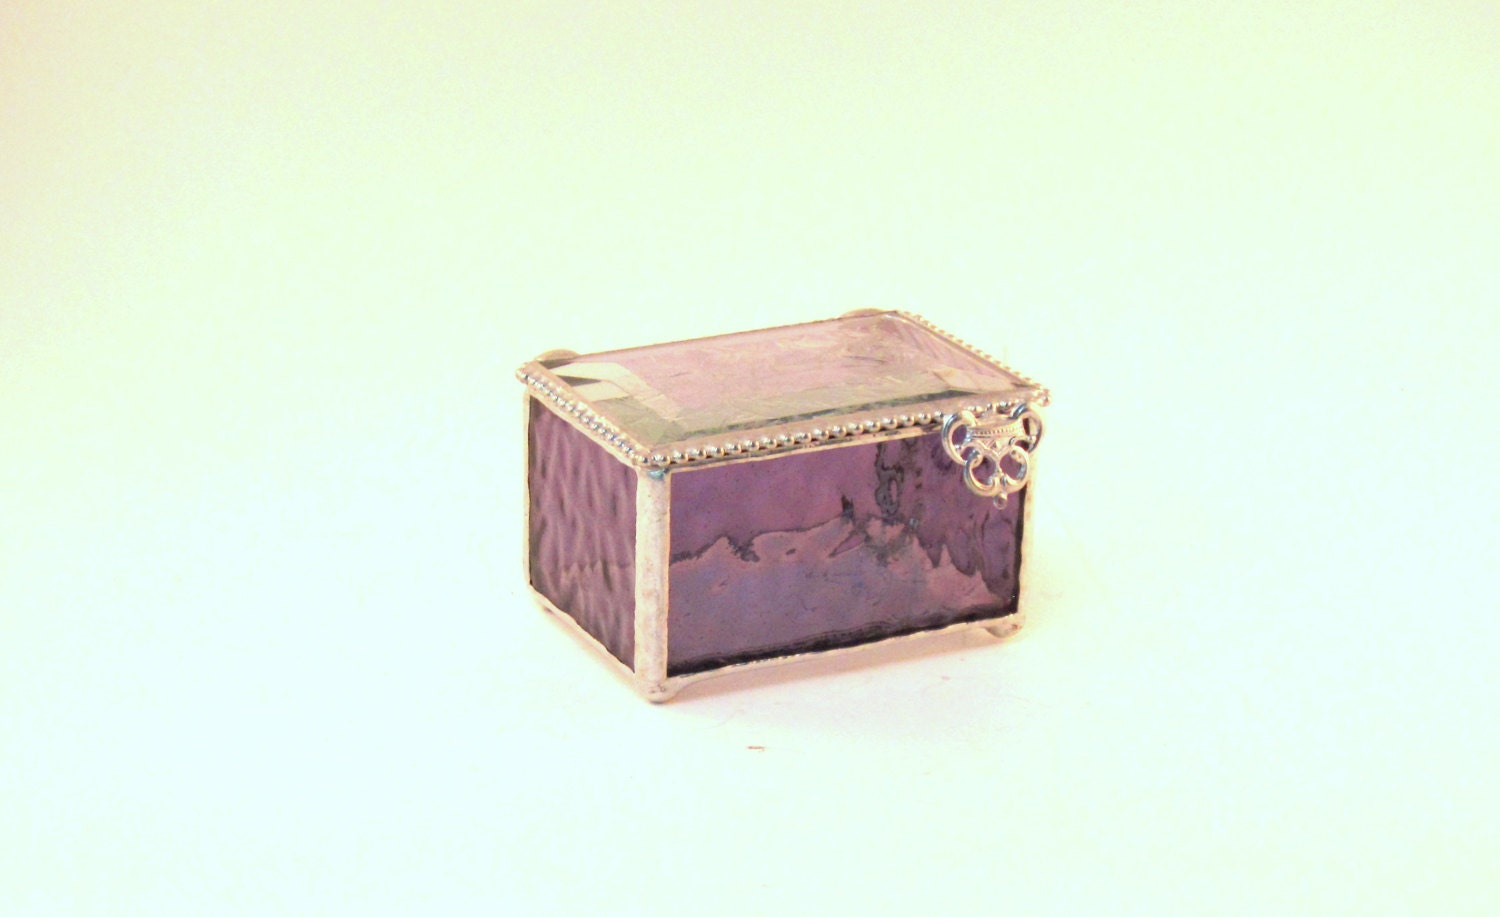 Amethyst Purple Stained Glass Jewelry Box, Keepsake Box, 2 x 3", Clear Bevel Lid, Bridesmaid Gift, Mother's Day Gift, Maid of Honor Gift - shopworksofglass